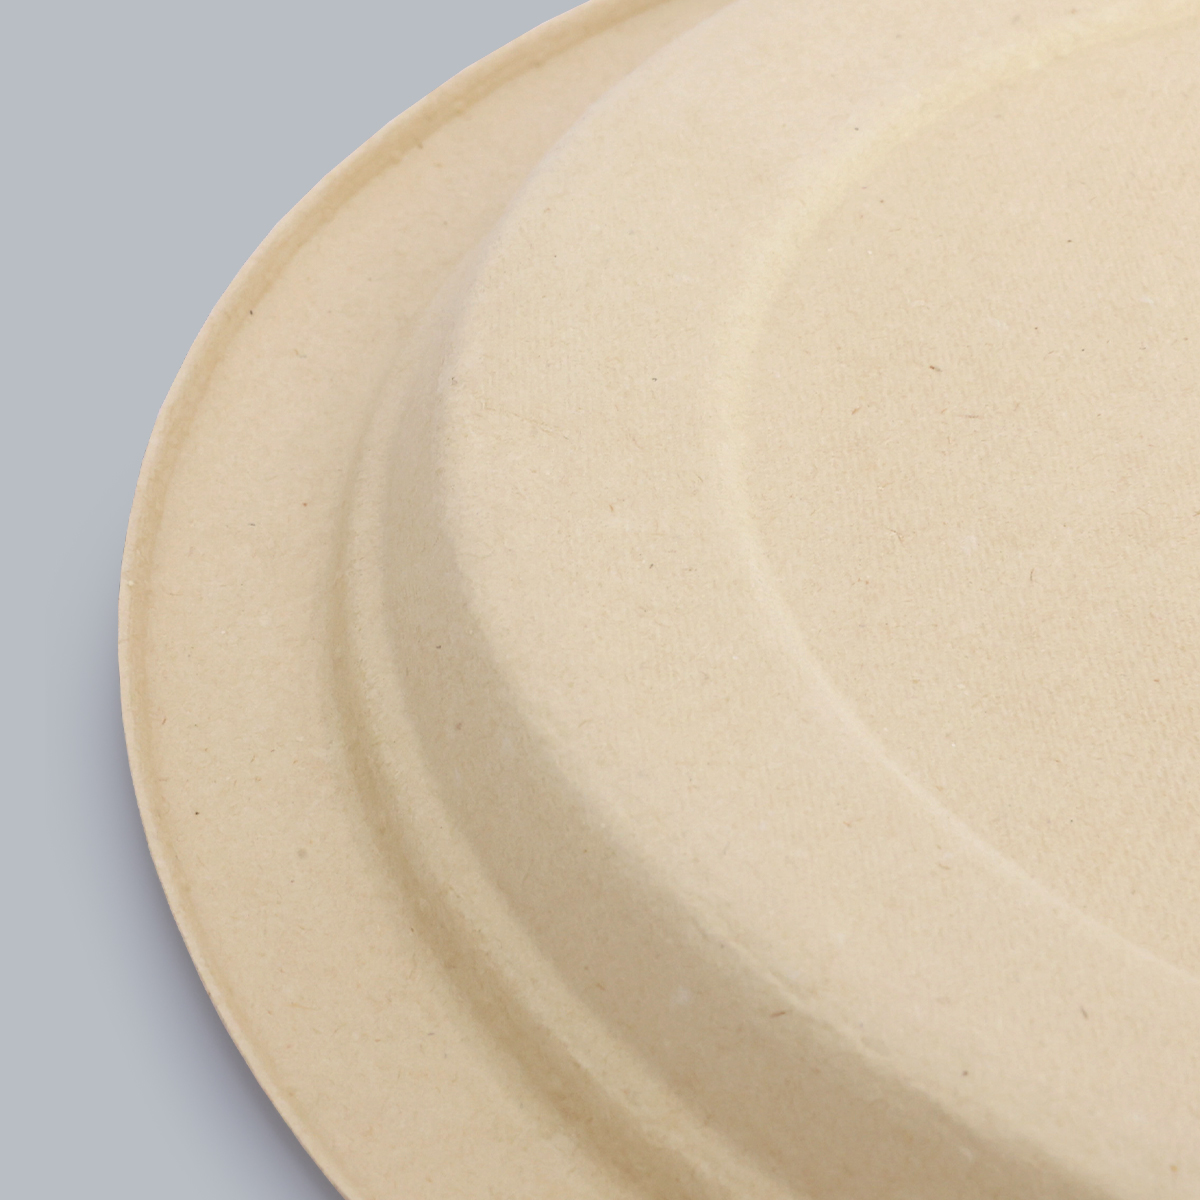 Green Paper Products Disposable Tableware 9-inch Round Plate Disposable Eco-Friendly Plates